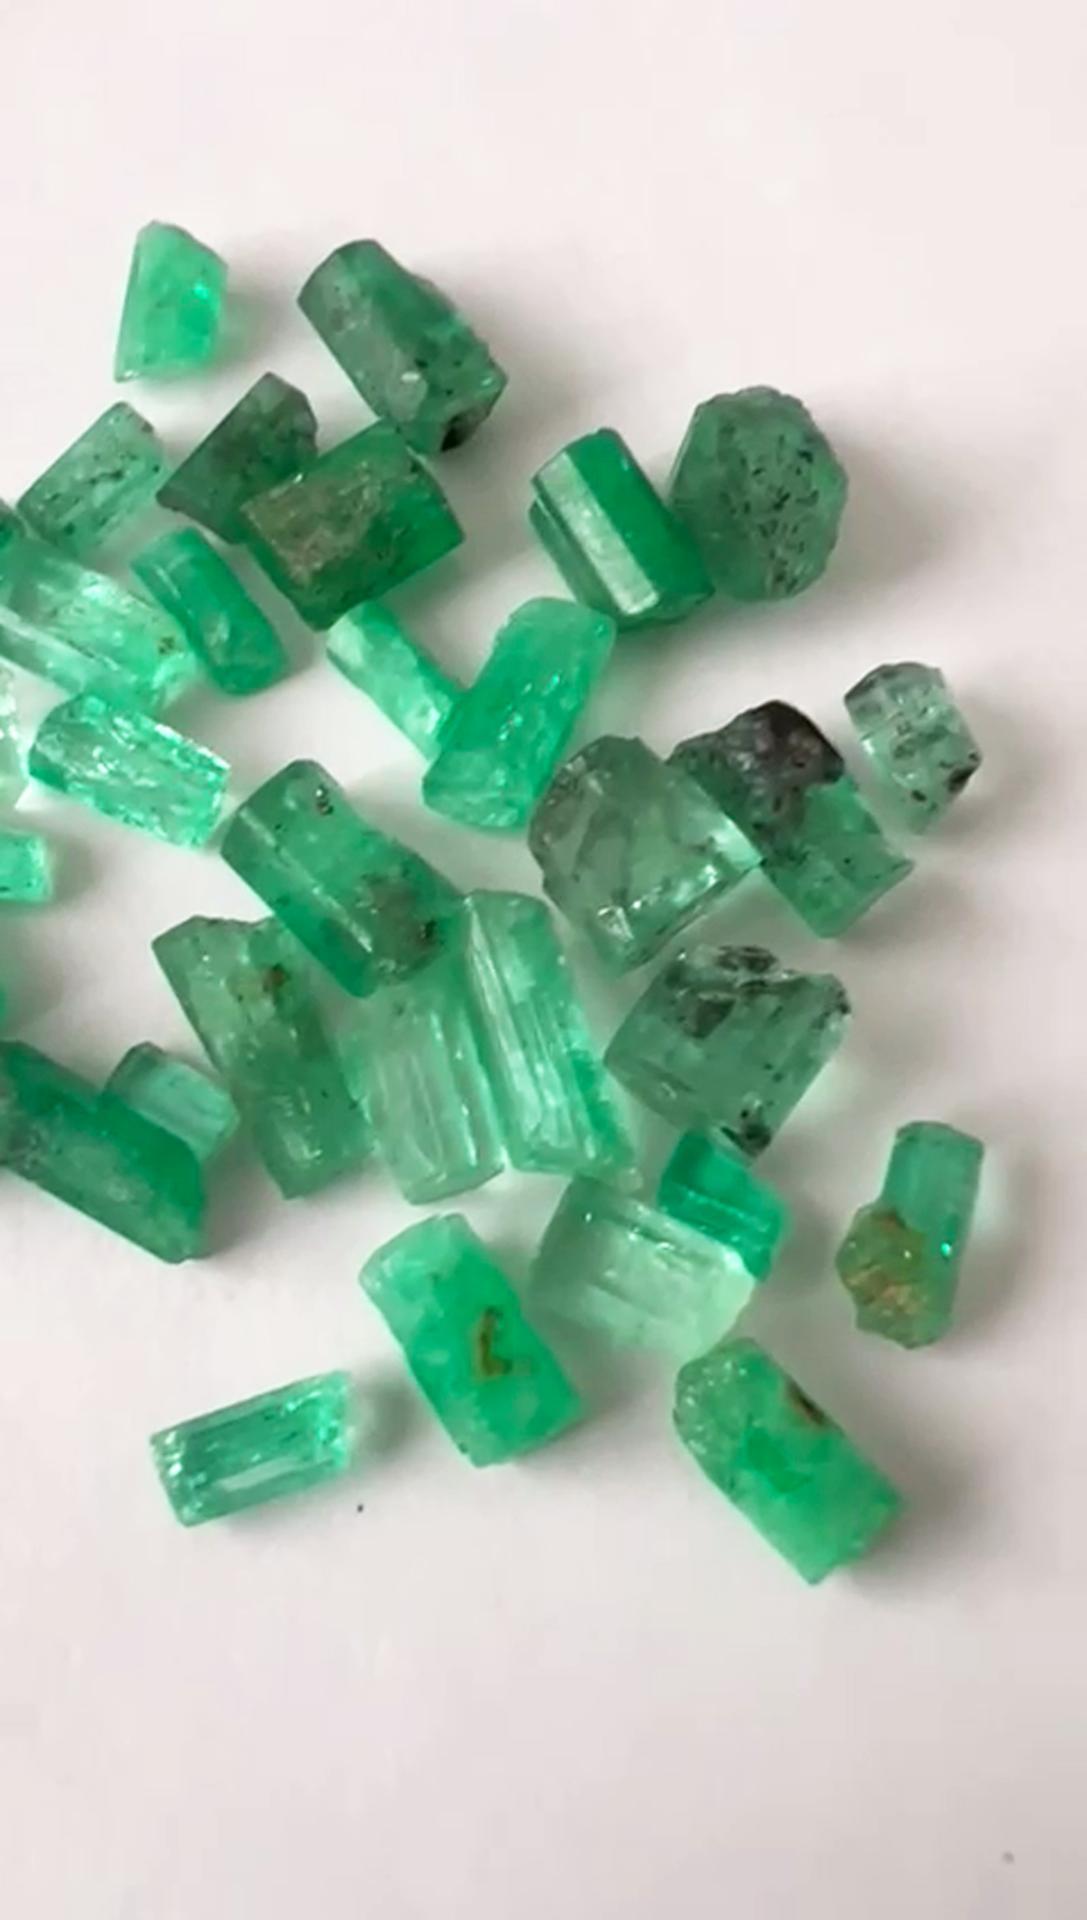 35 Ct. Rough Colombian Emerald Lot